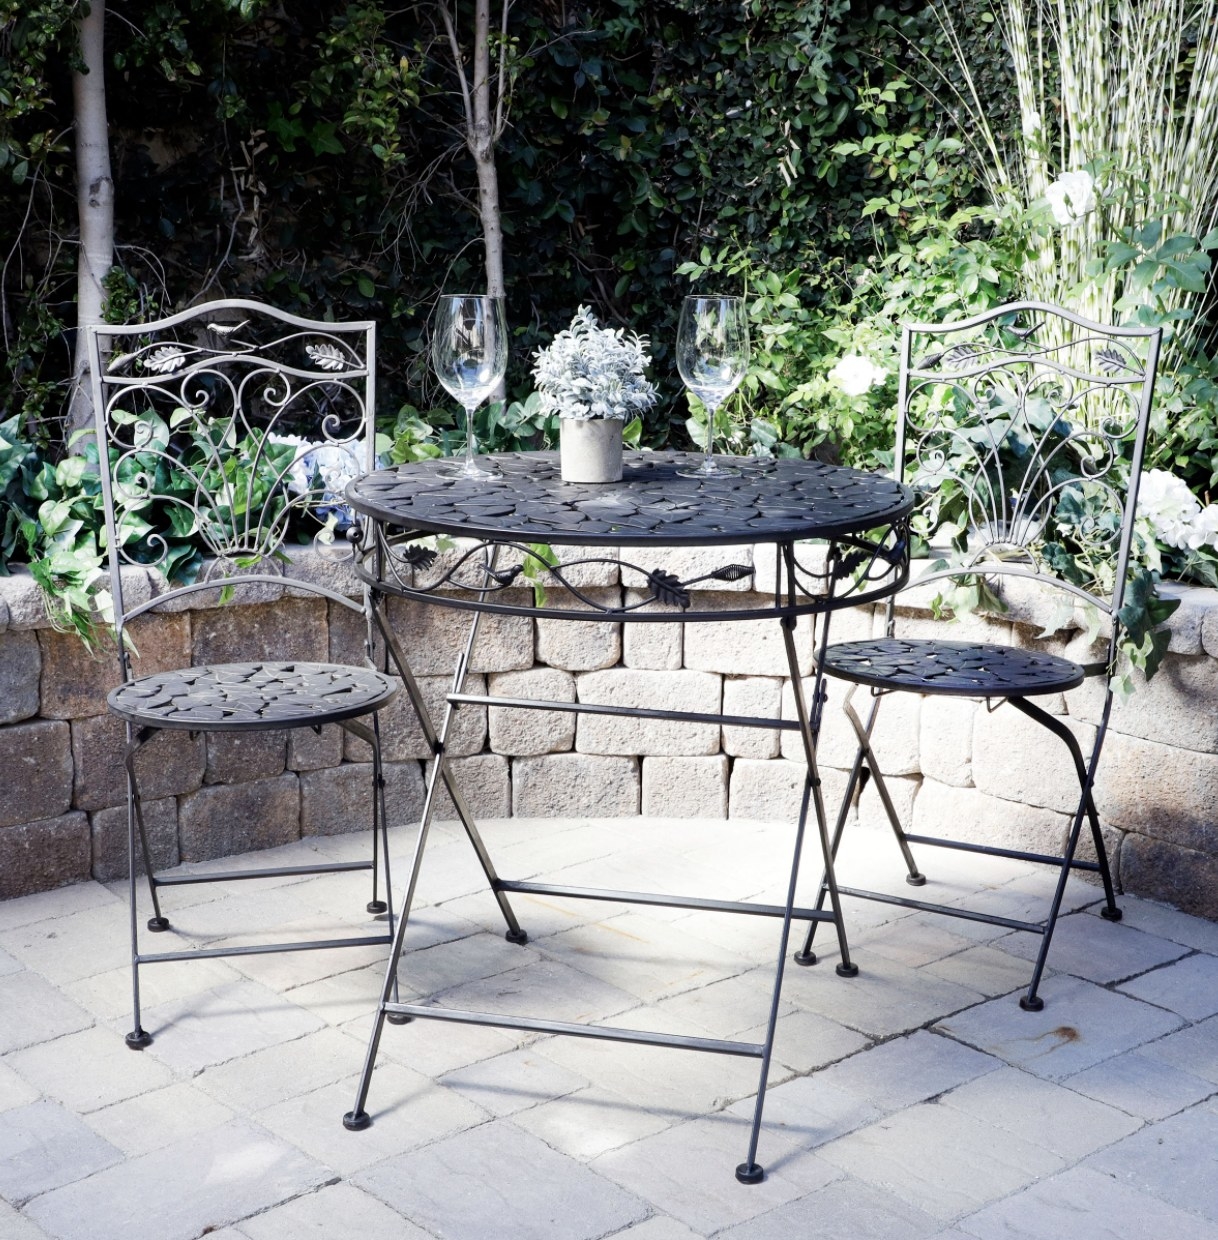 The black bistro set is outdoors and decorated with leafs and birds